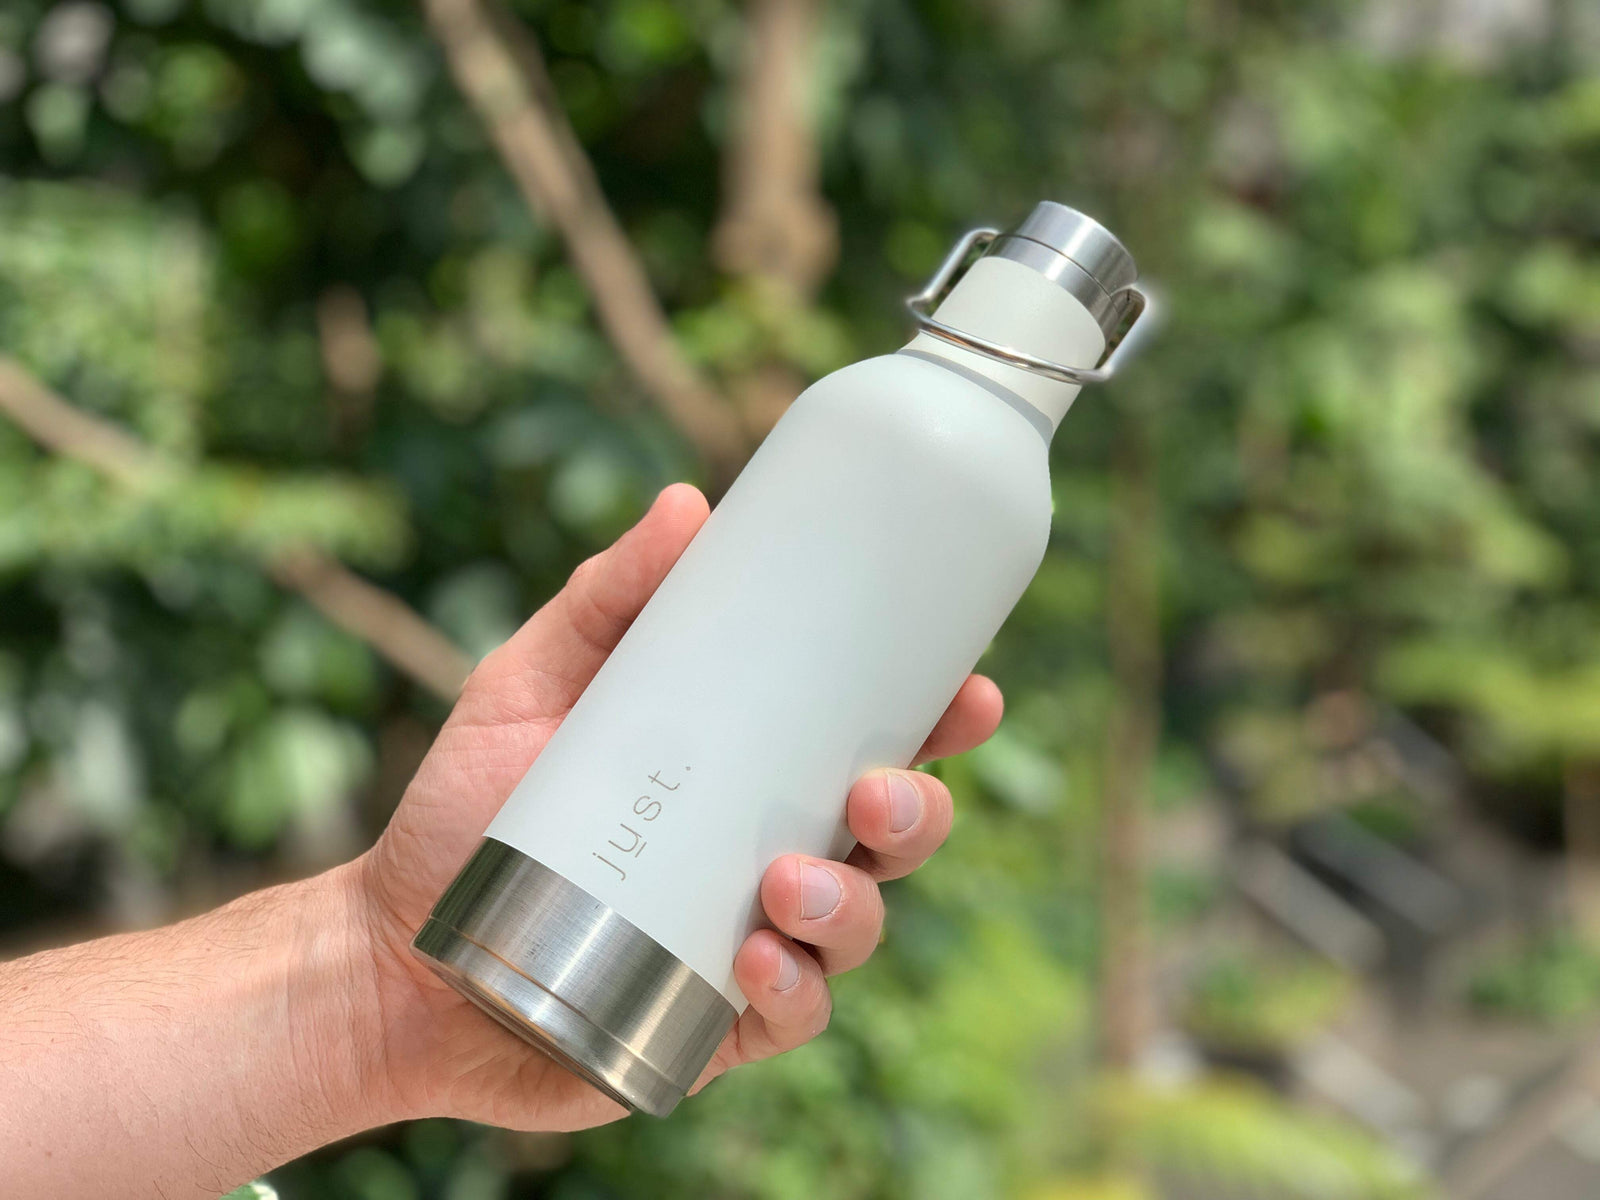 White reusable water bottle held in hand with trees in background